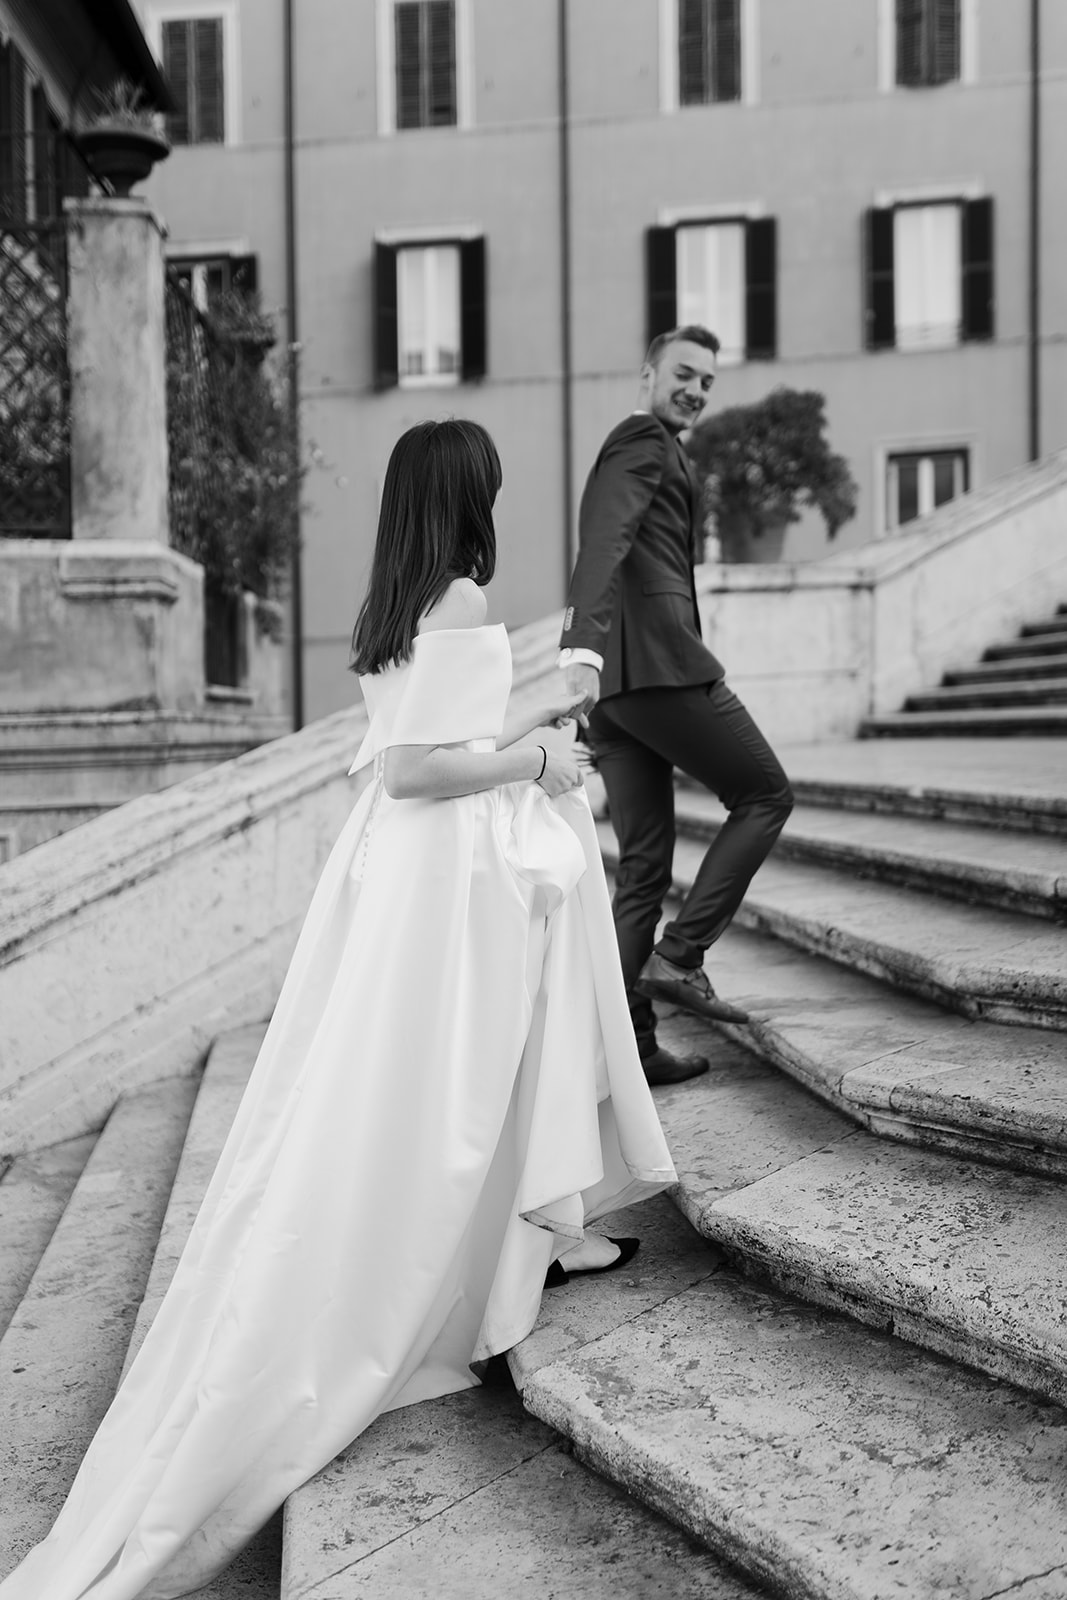 After wedding photoshoot in Rome. Wedding couple walking up the Spanish steps photographed by Clara Buchberger